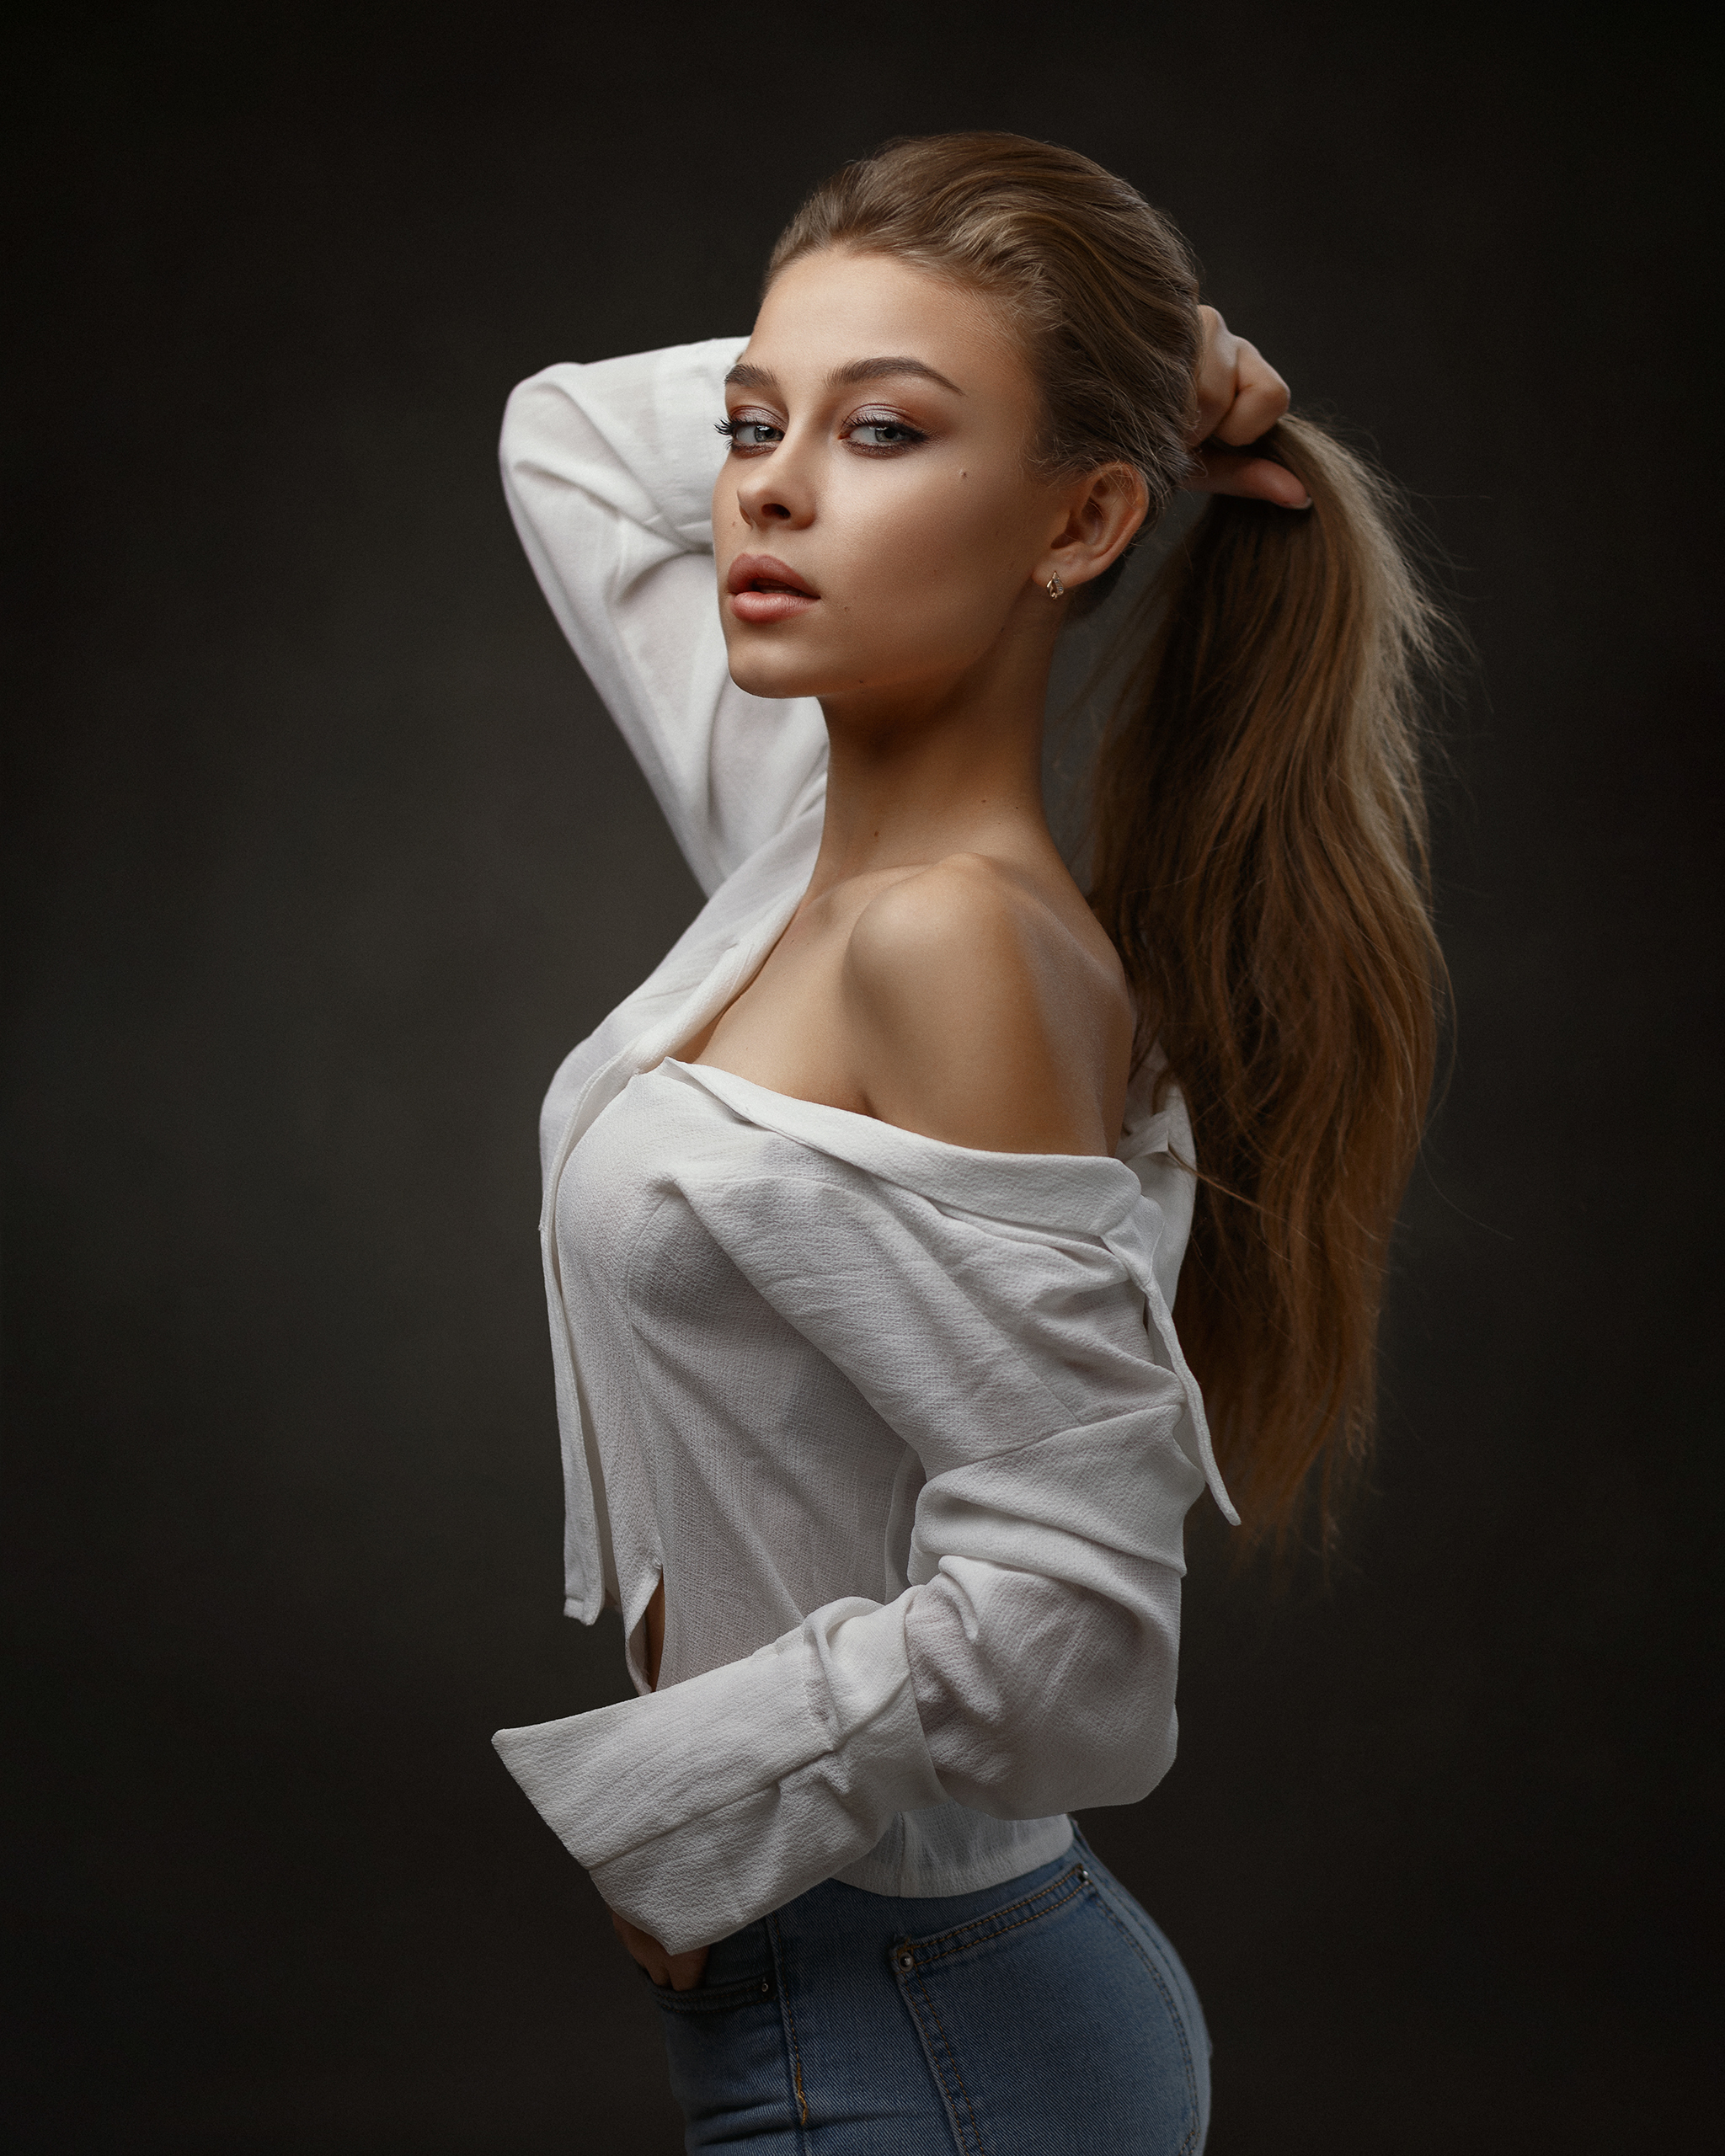 Ivan Kovalyov Women Brunette Holding Hair Ponytail Makeup Looking At Viewer Bare Shoulders White Clo 2048x2560